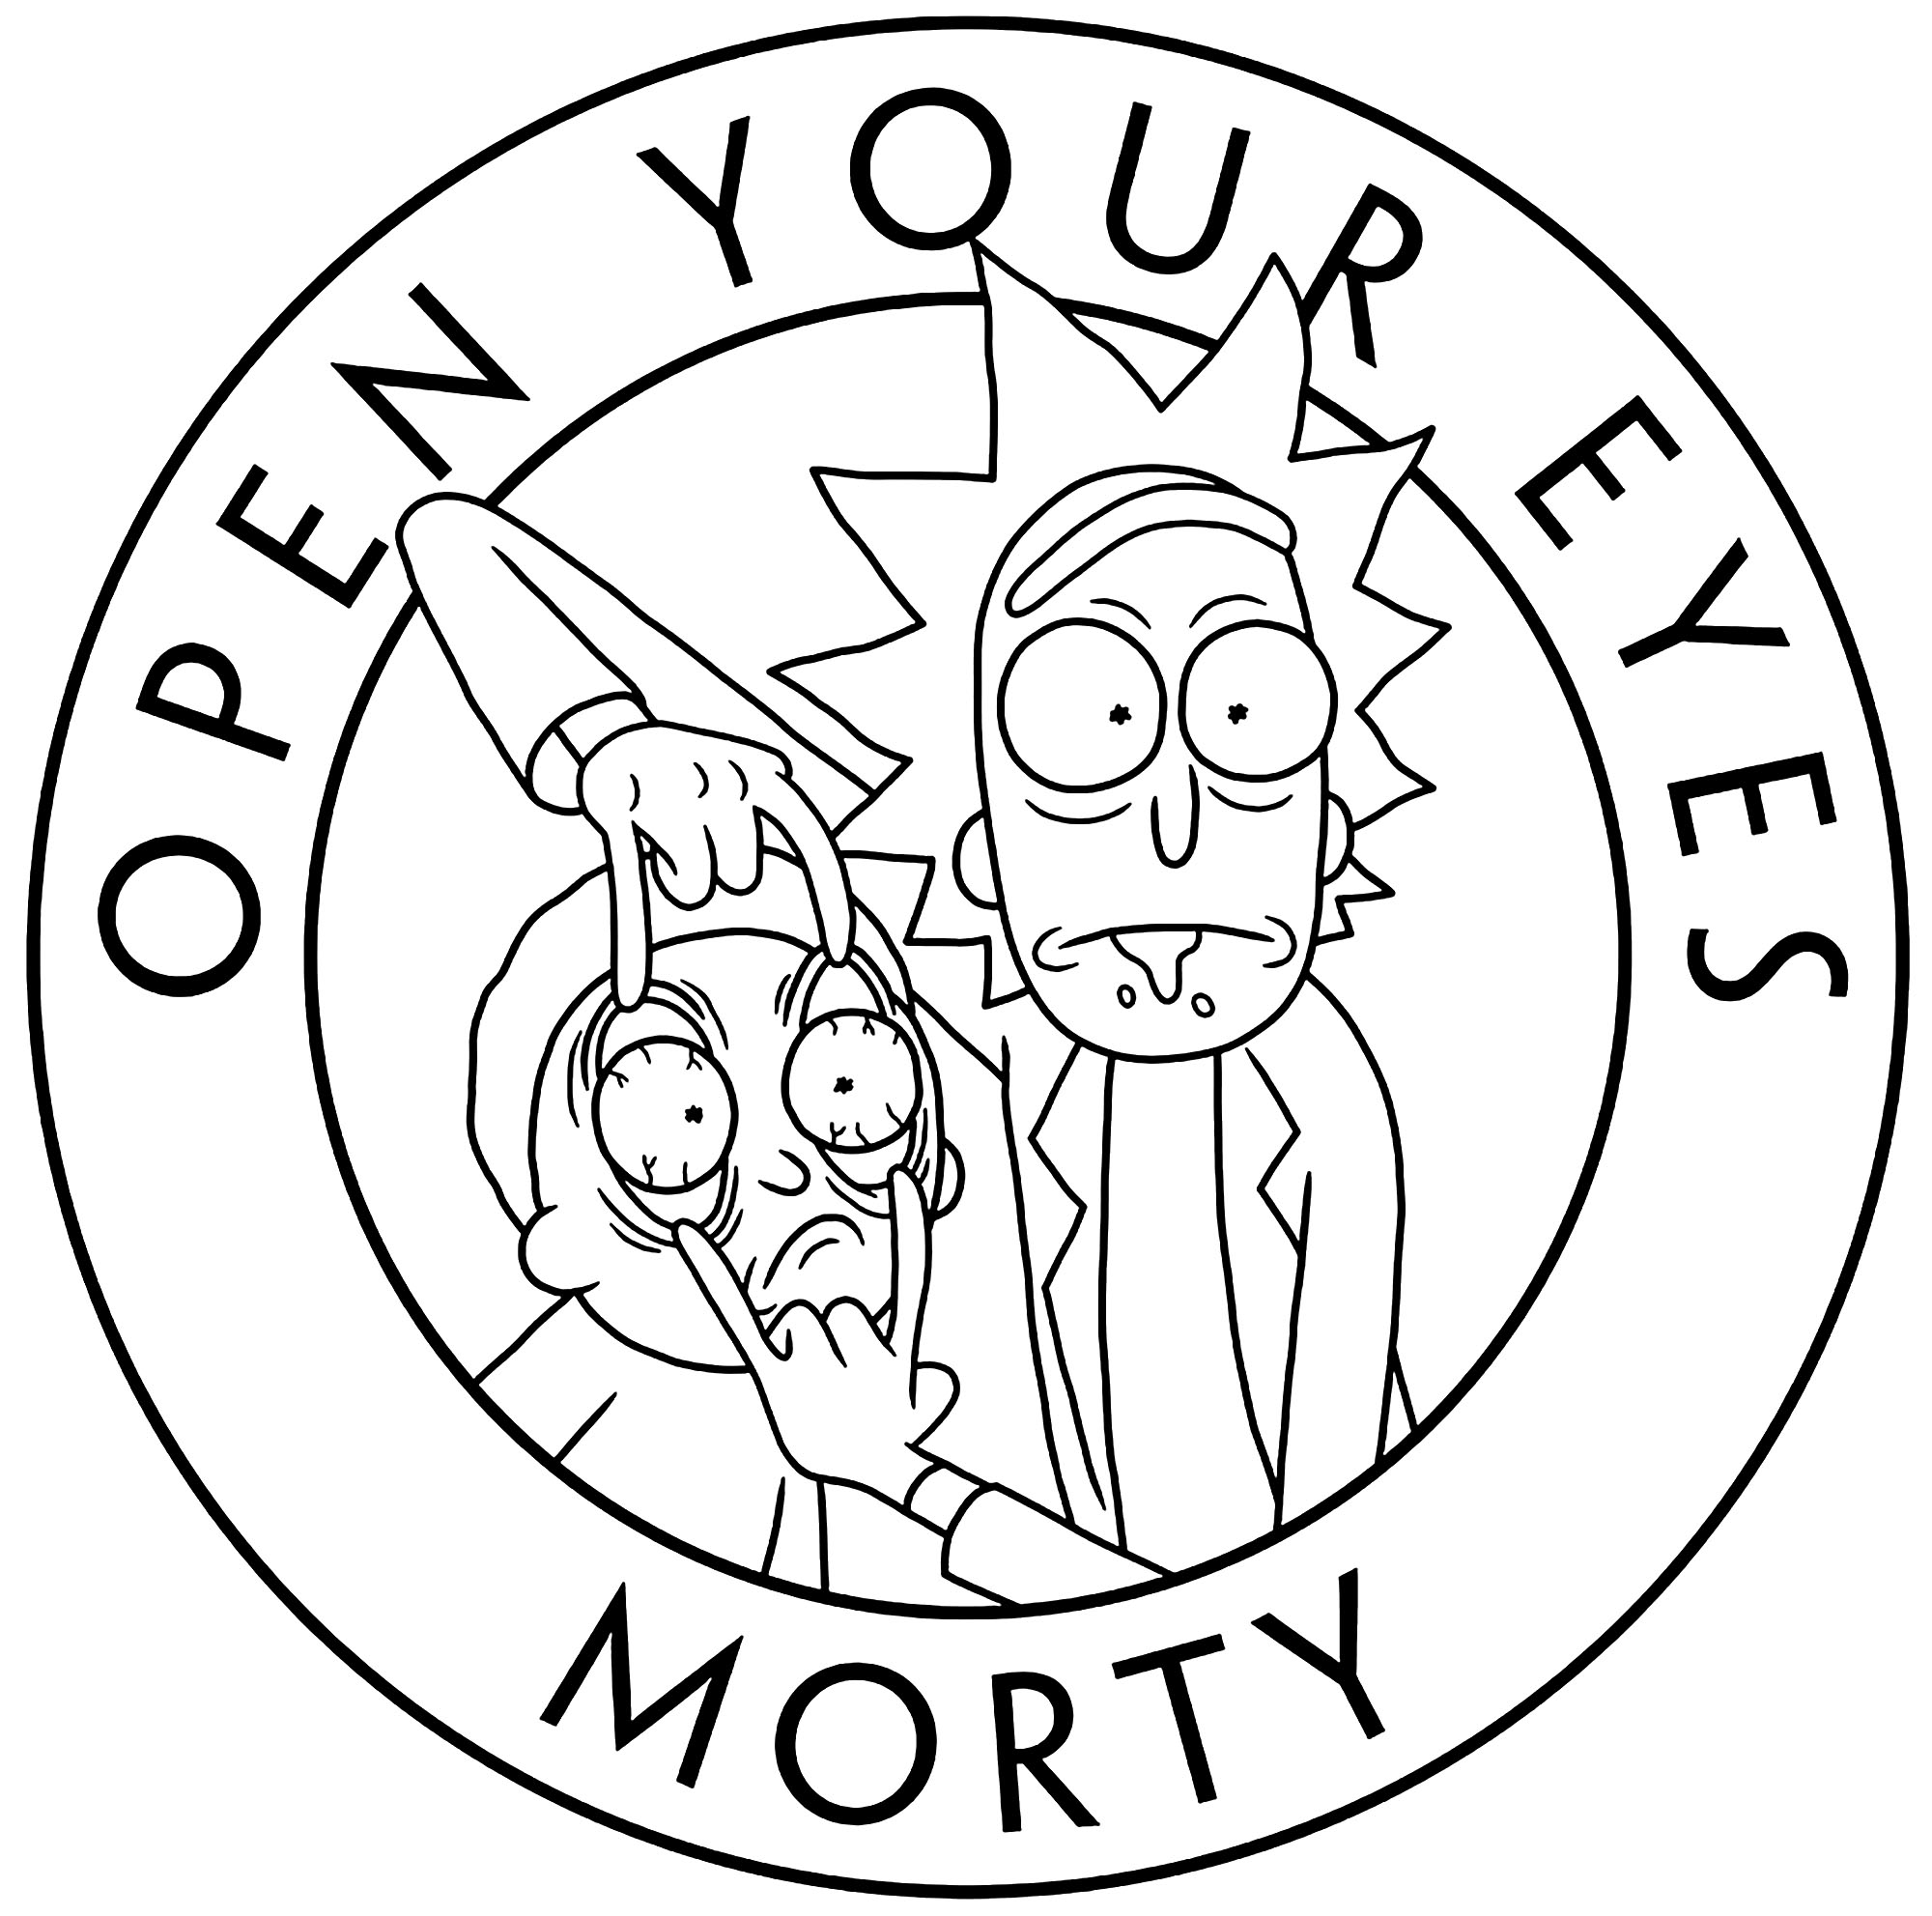 Rick and morty - Coloring Pages for Adults